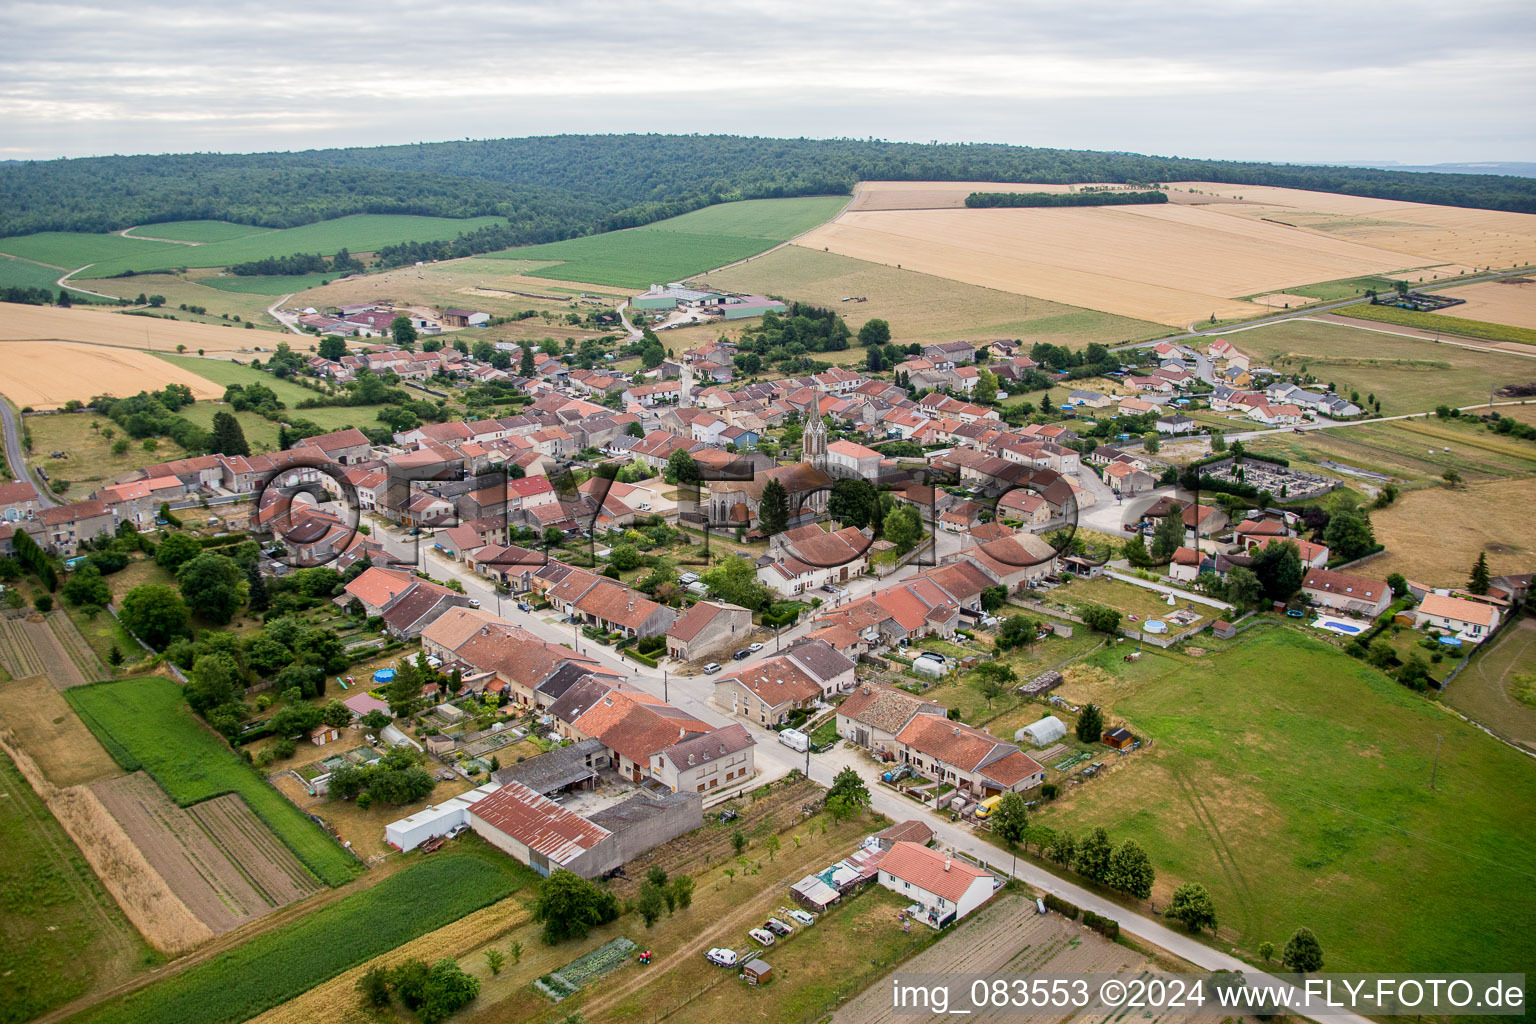 Village - view on the edge of agricultural fields and farmland in Uruffe in Grand Est, France